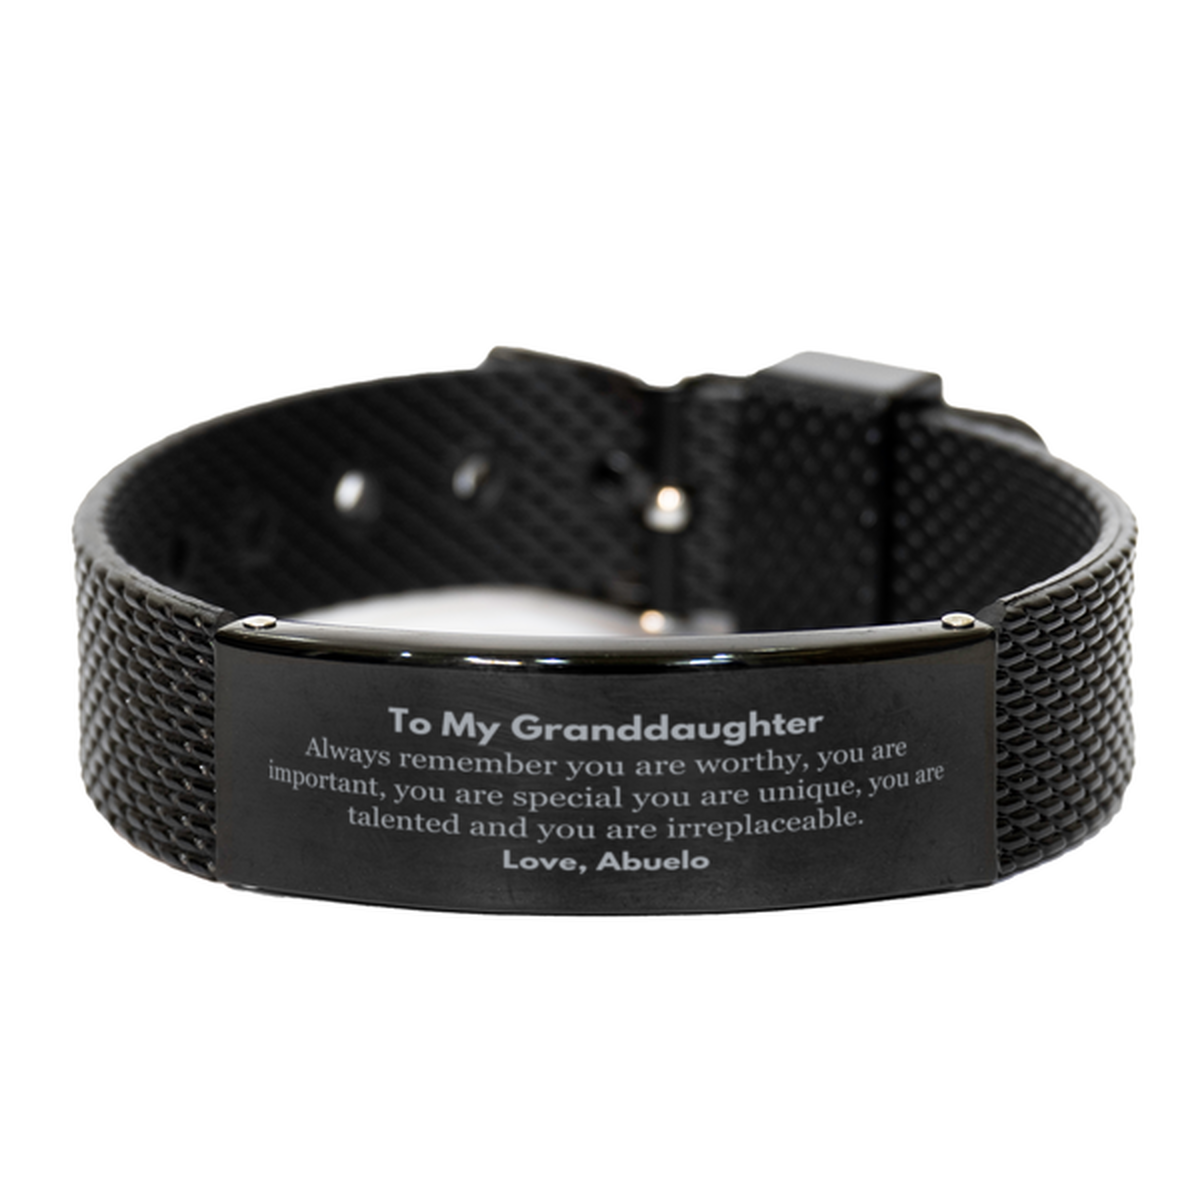 Granddaughter Birthday Gifts from Abuelo, Inspirational Black Shark Mesh Bracelet for Granddaughter Christmas Graduation Gifts for Granddaughter Always remember you are worthy, you are important. Love, Abuelo